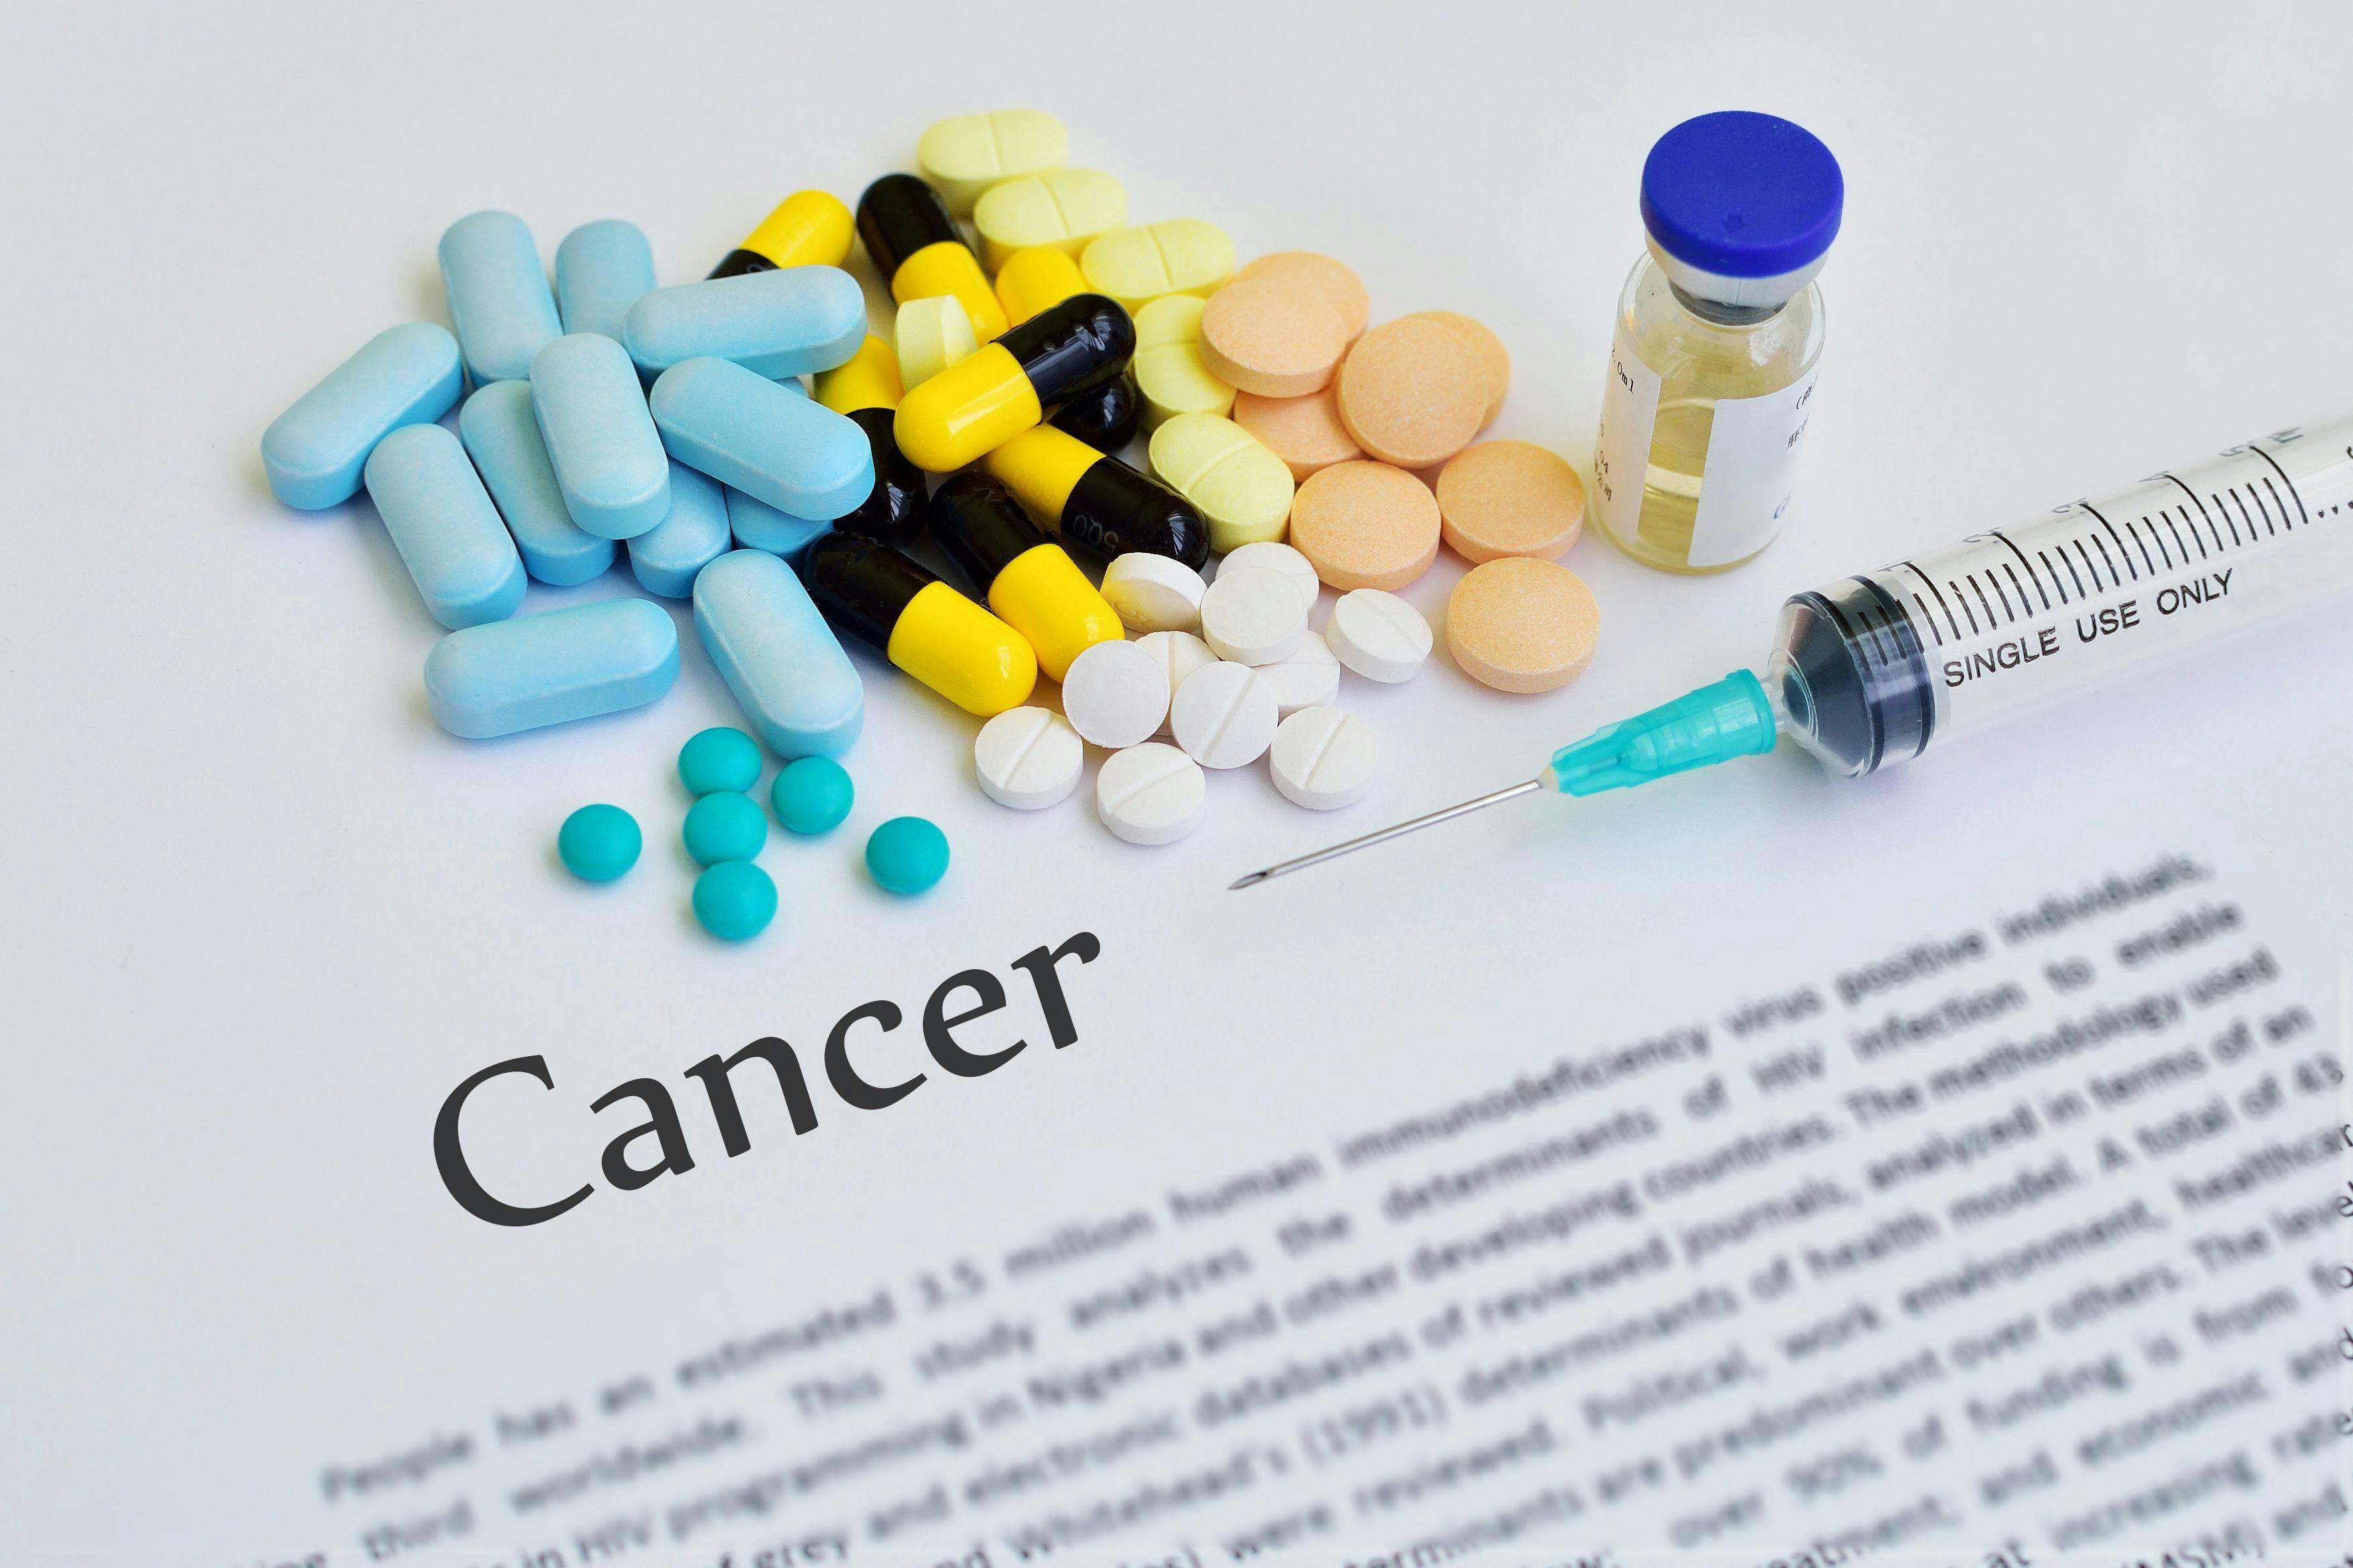 Expert: FDA to Continue Efforts to Address Disparities in Cancer Drug Trials